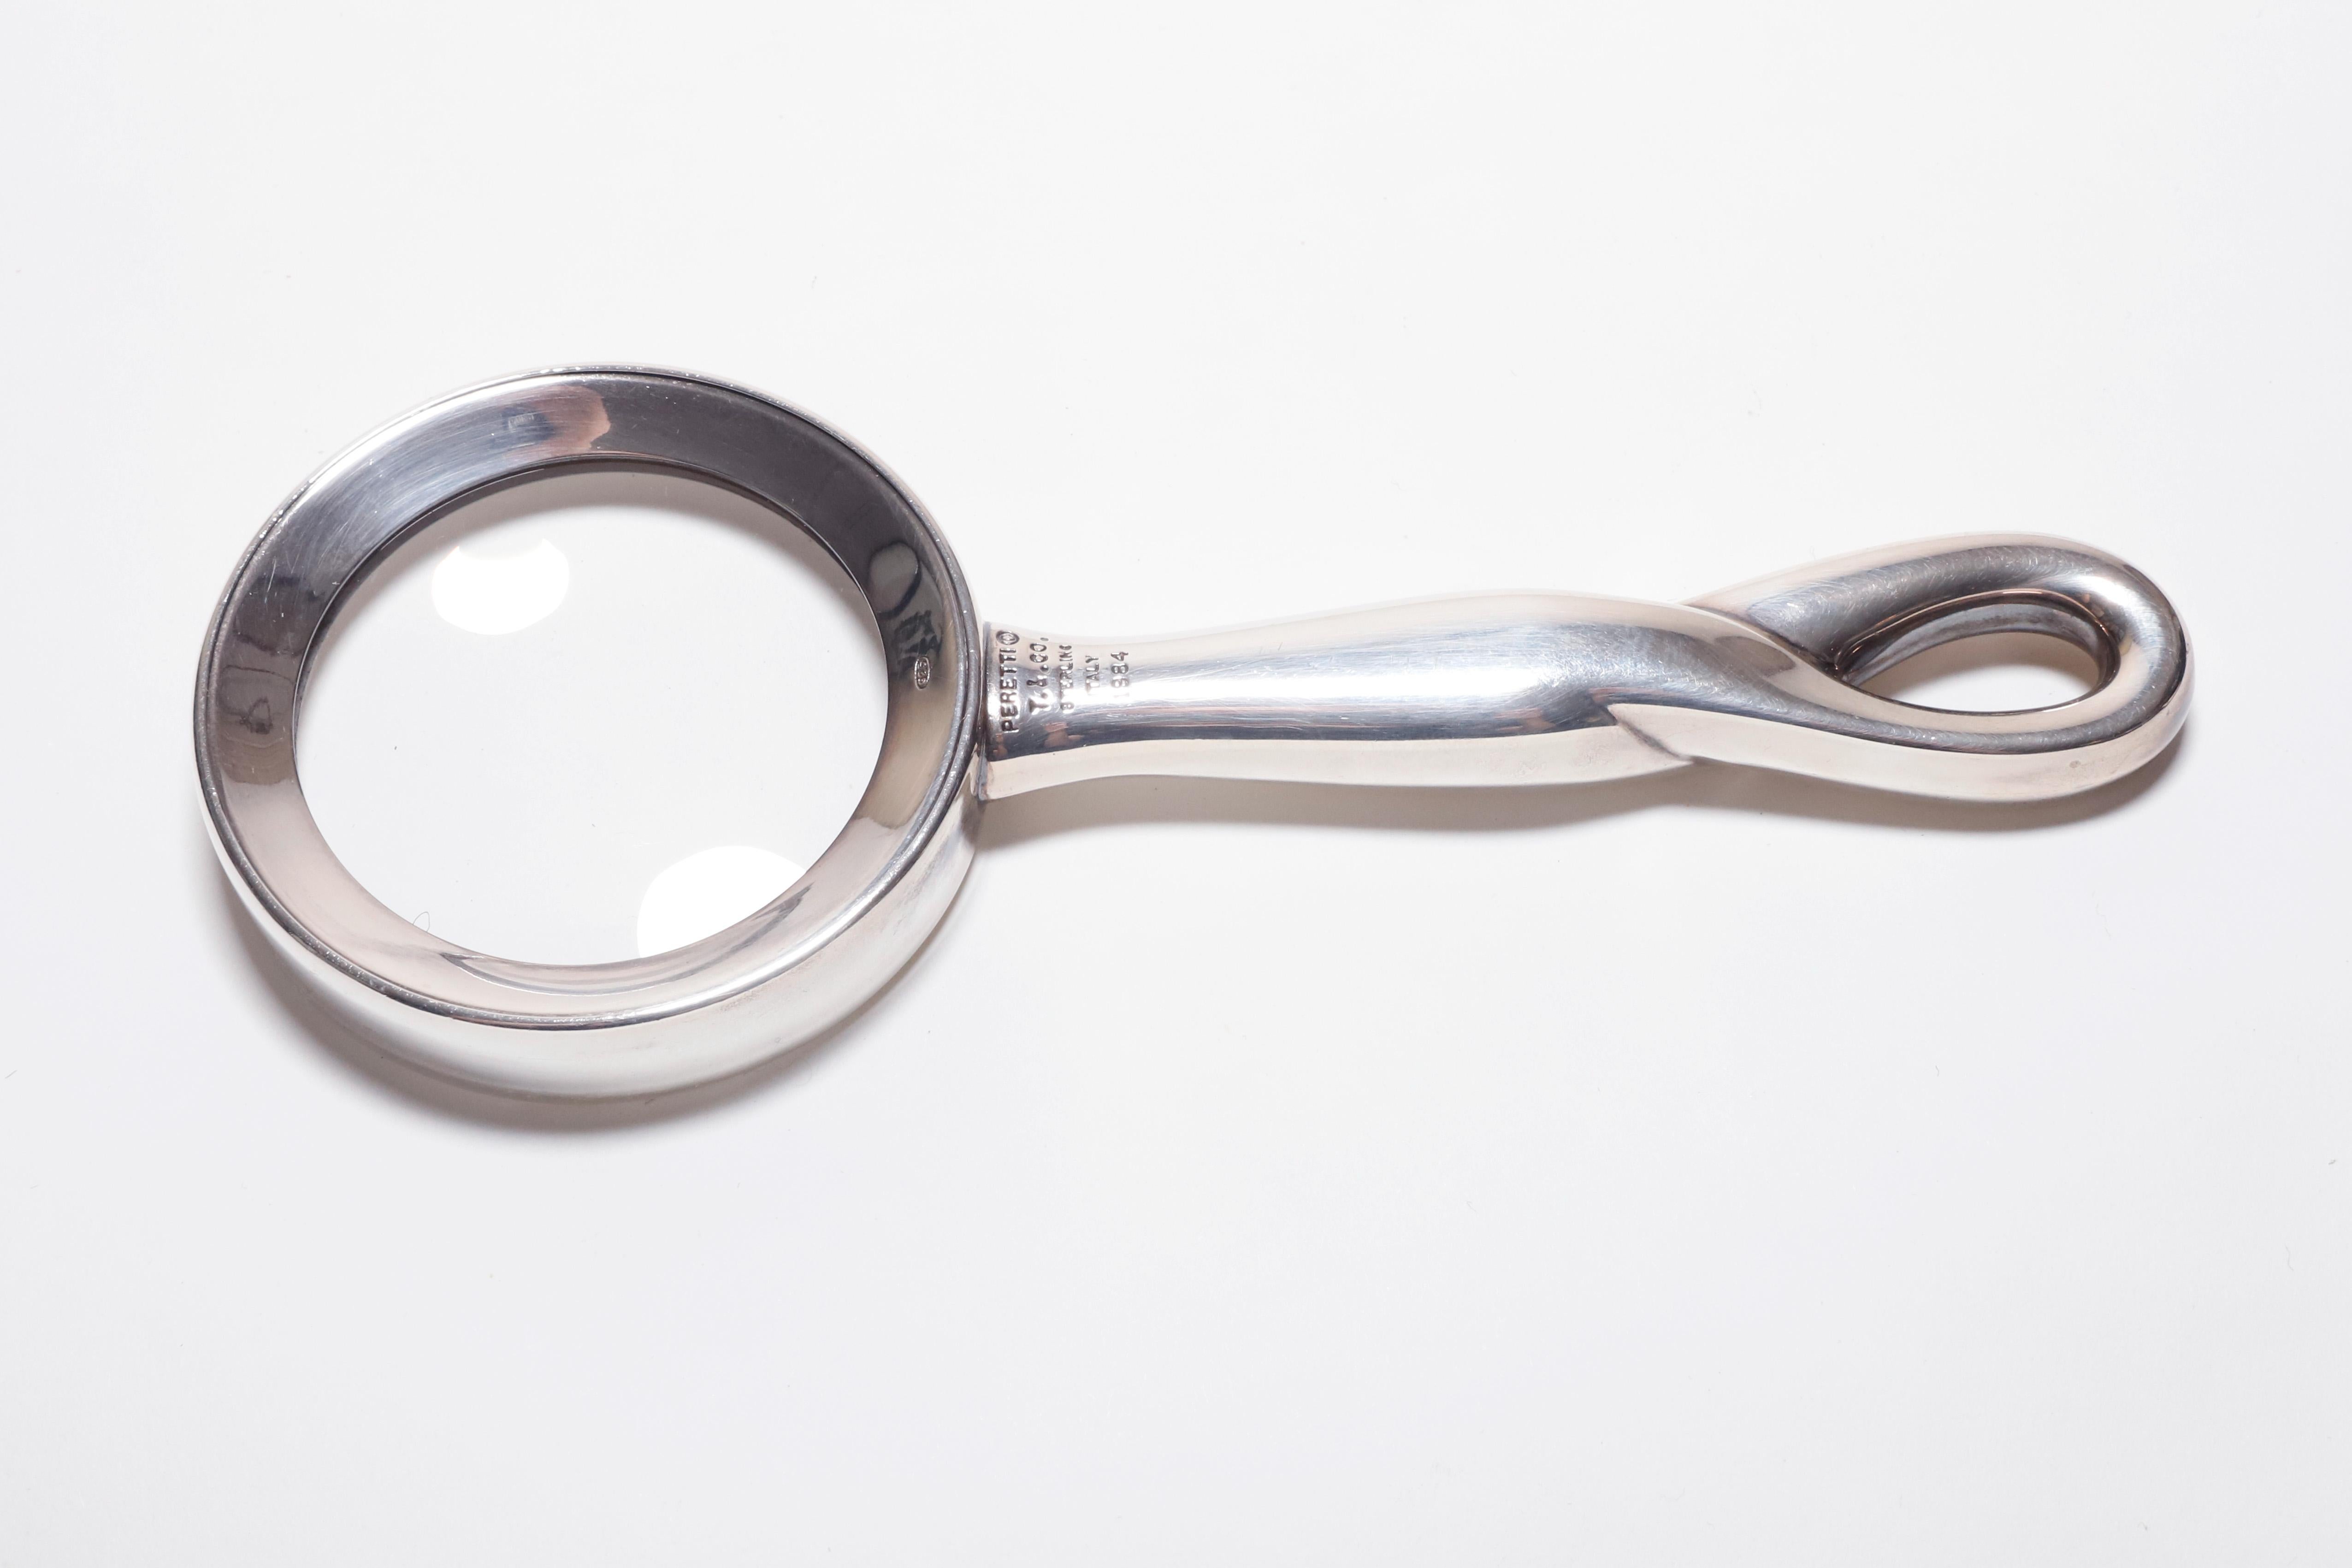 High quality sterling silver magnifying glass by the Italian designer Elsa Peretti for Tiffany & Co. Designed in 1984 the 